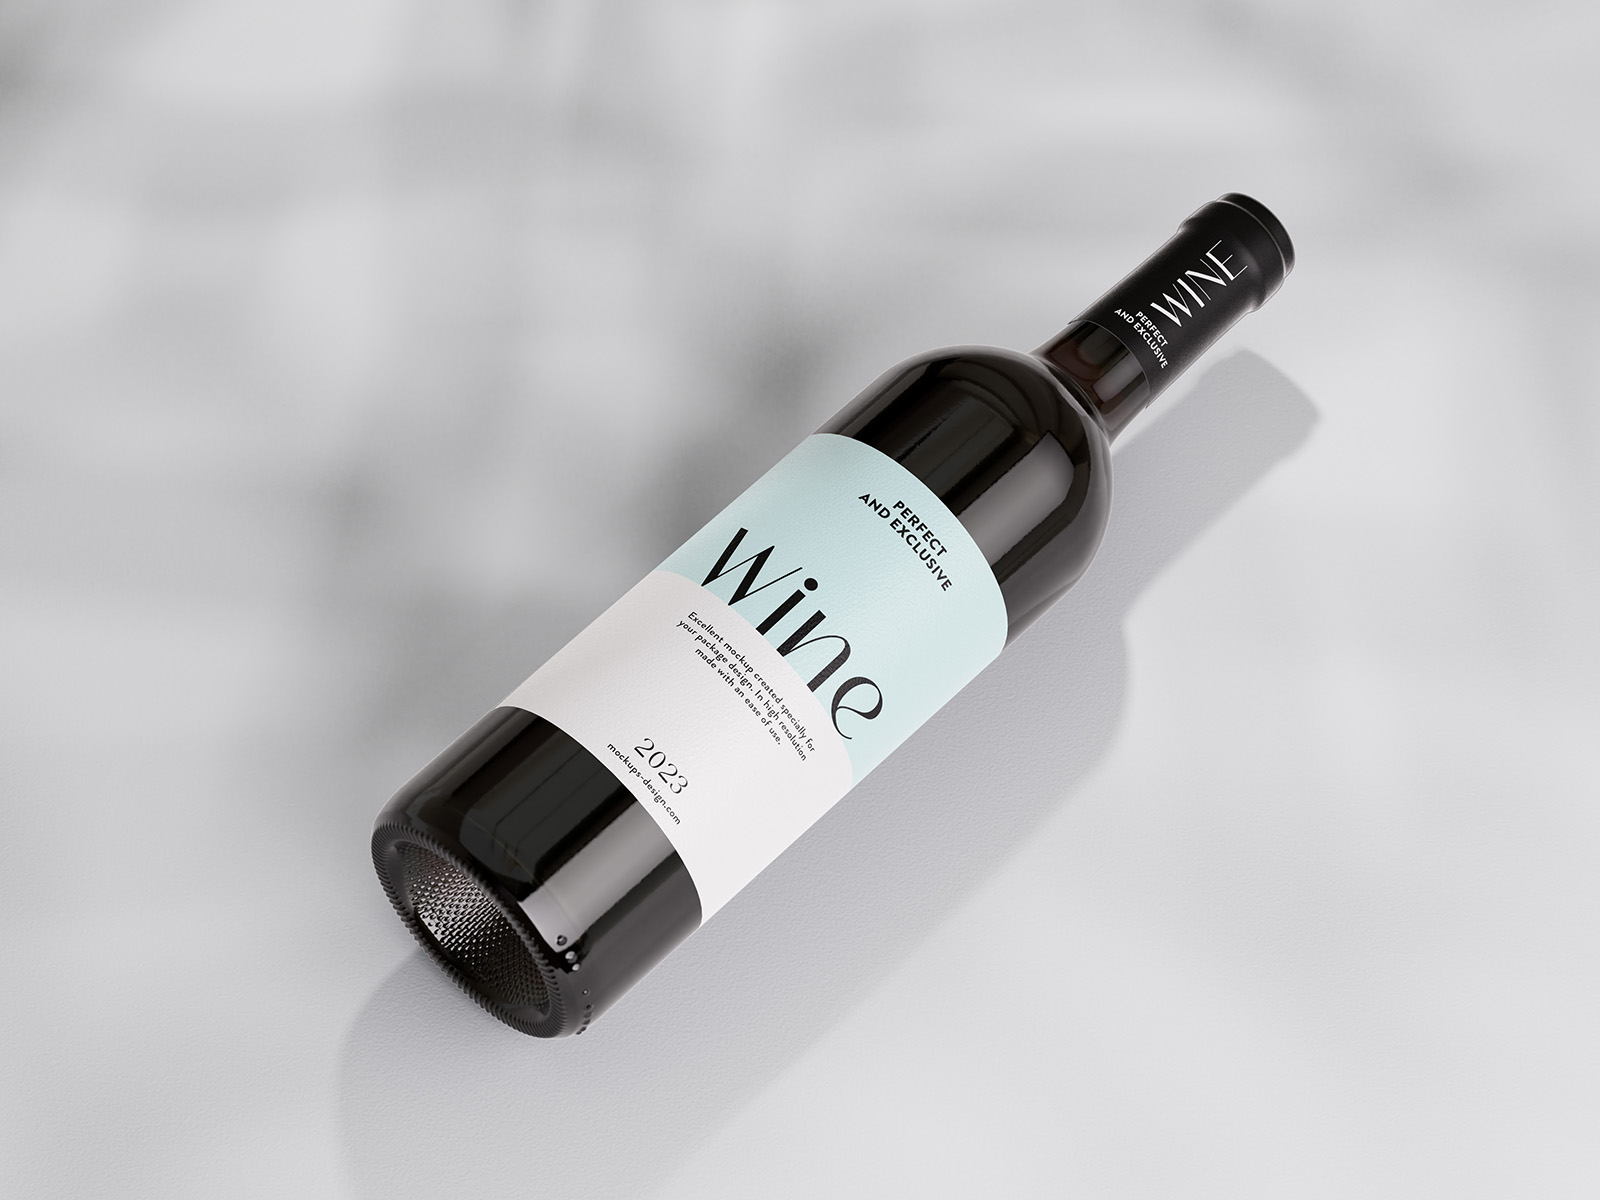 Wine bottle with clear background mockup